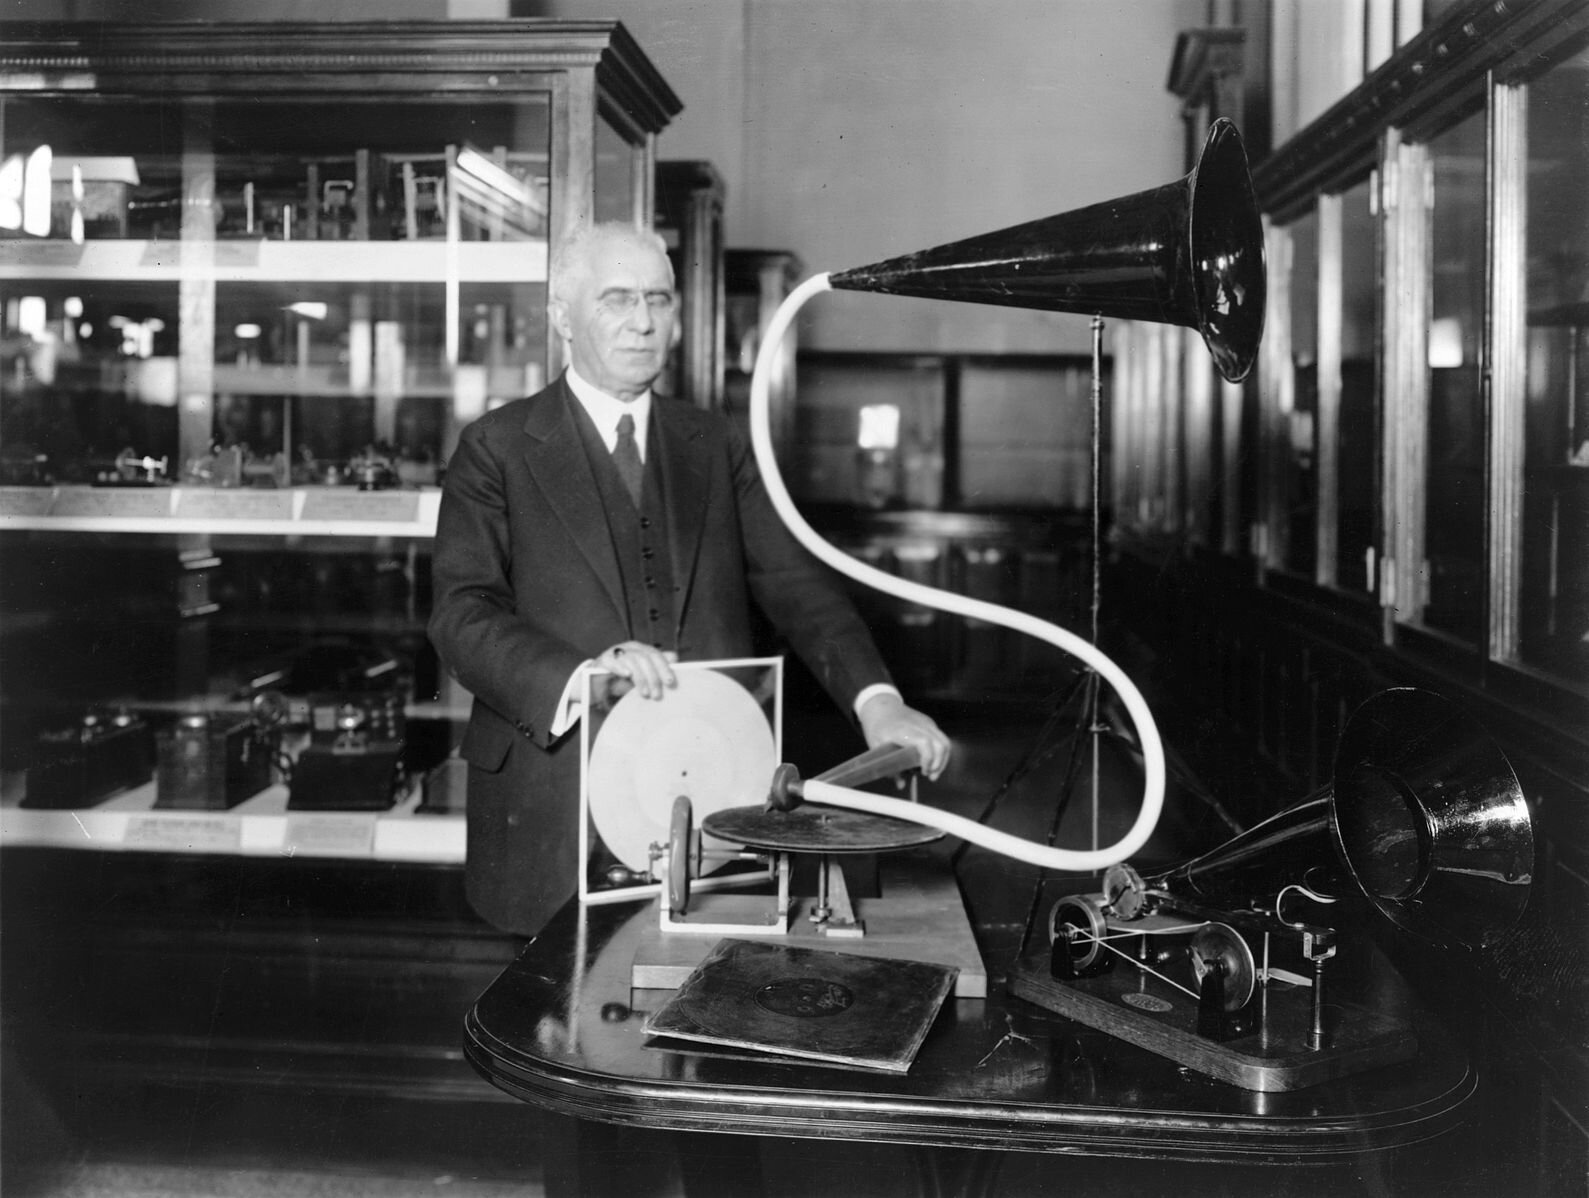 Emil Berliner, founder of Deutsche Grammophon, with an early phonograph